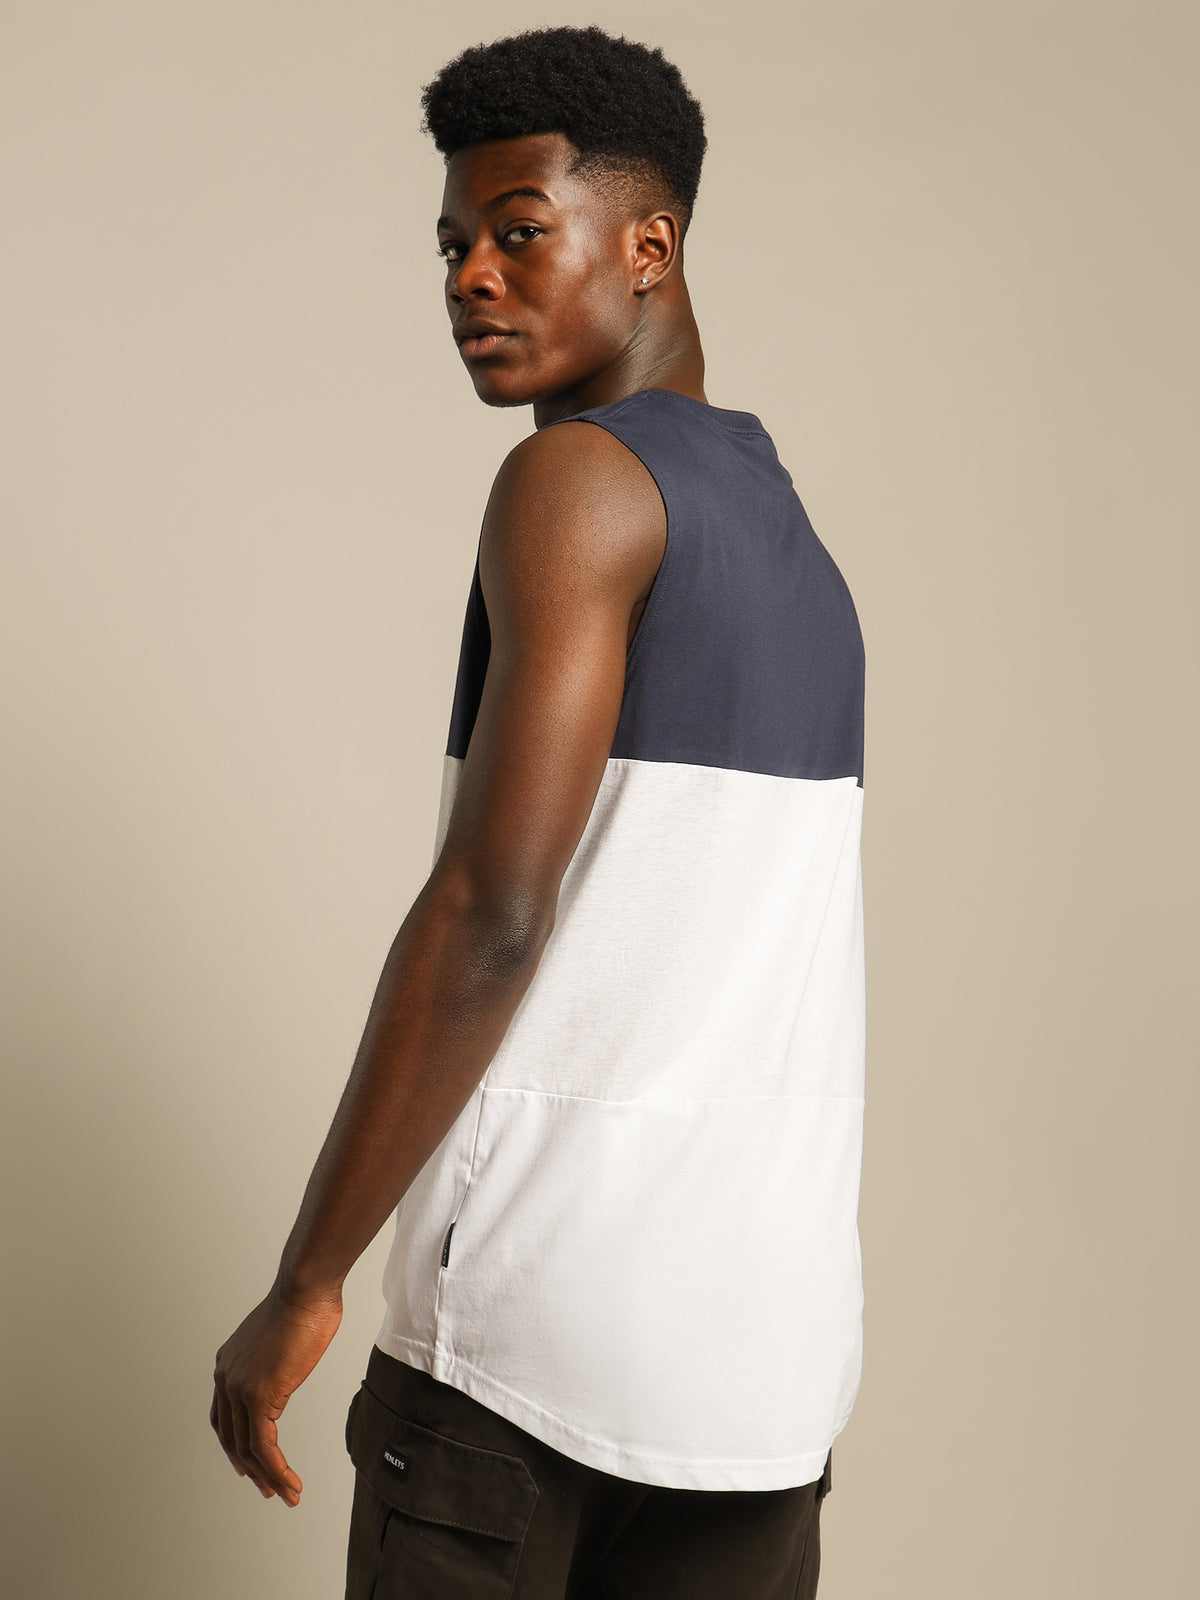 Rebellion Loose Muscle Shirt in Navy